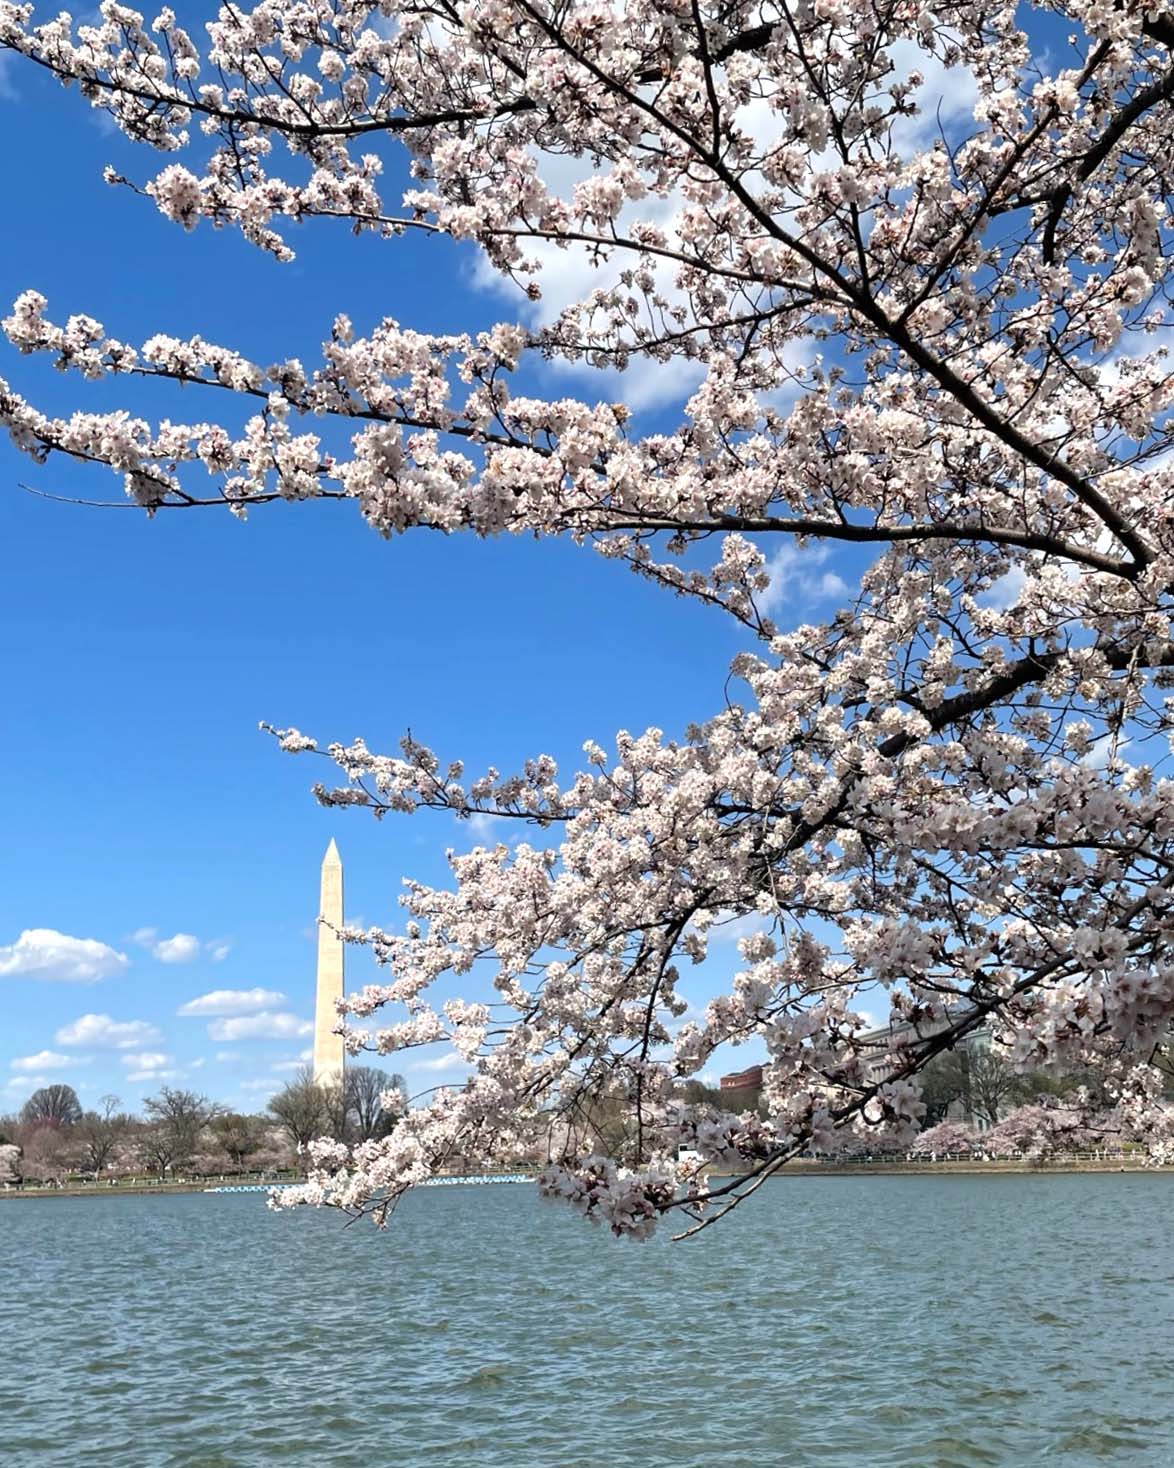 A Fresh Look at the Cherry Blossom Festival in Washington D.C.